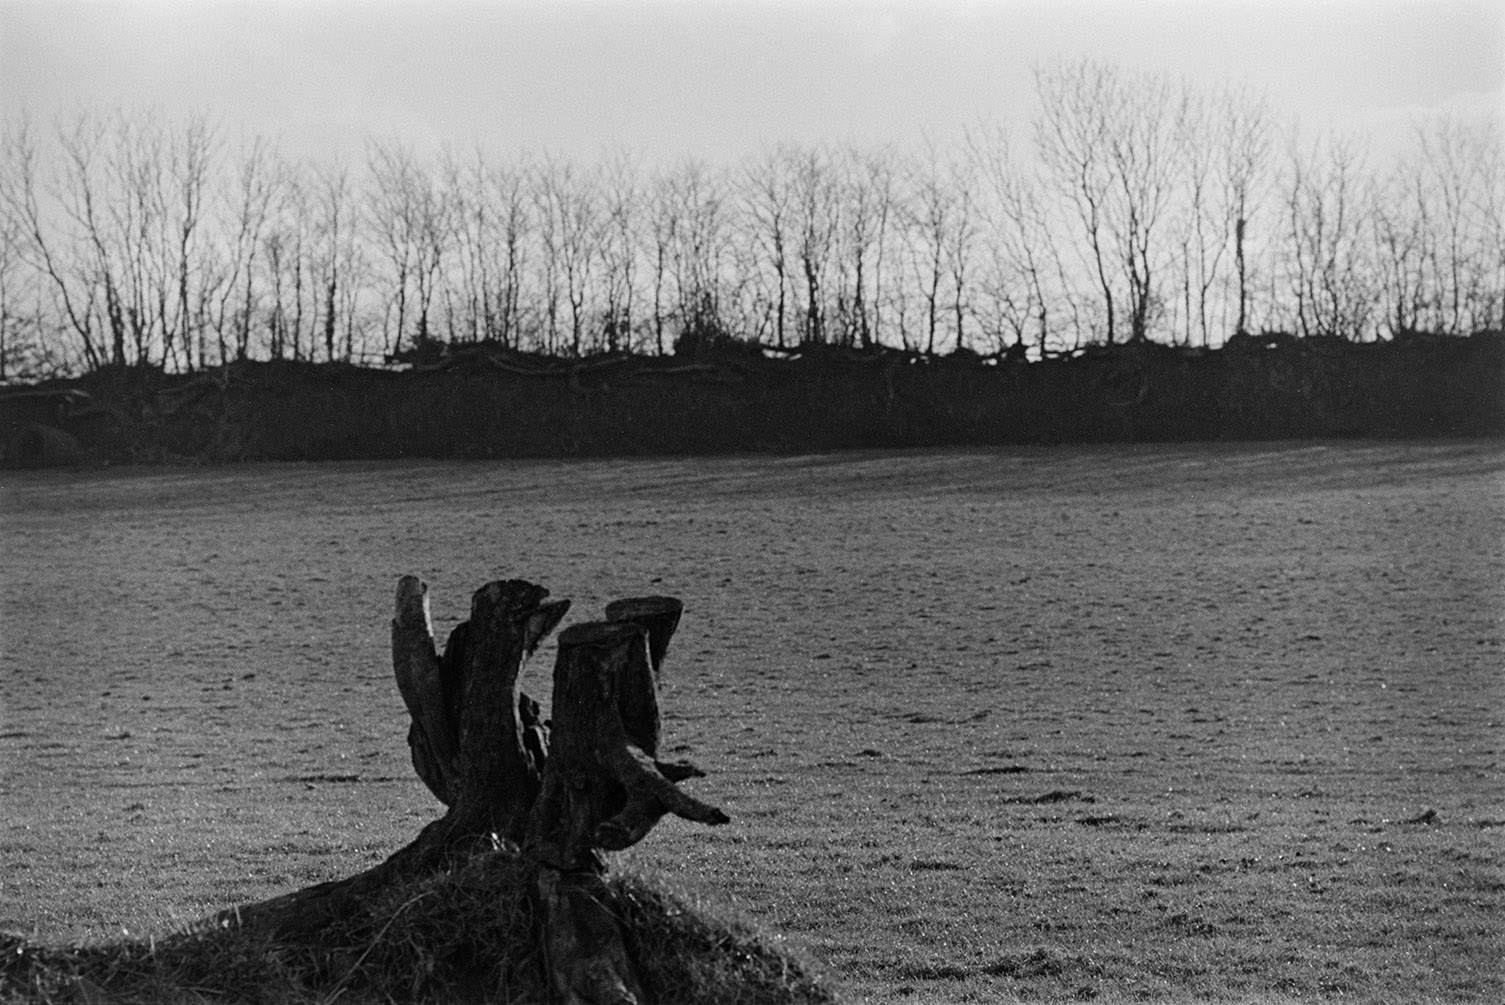 A gnarled tree stump or root in a field with a hedgerow in the background.